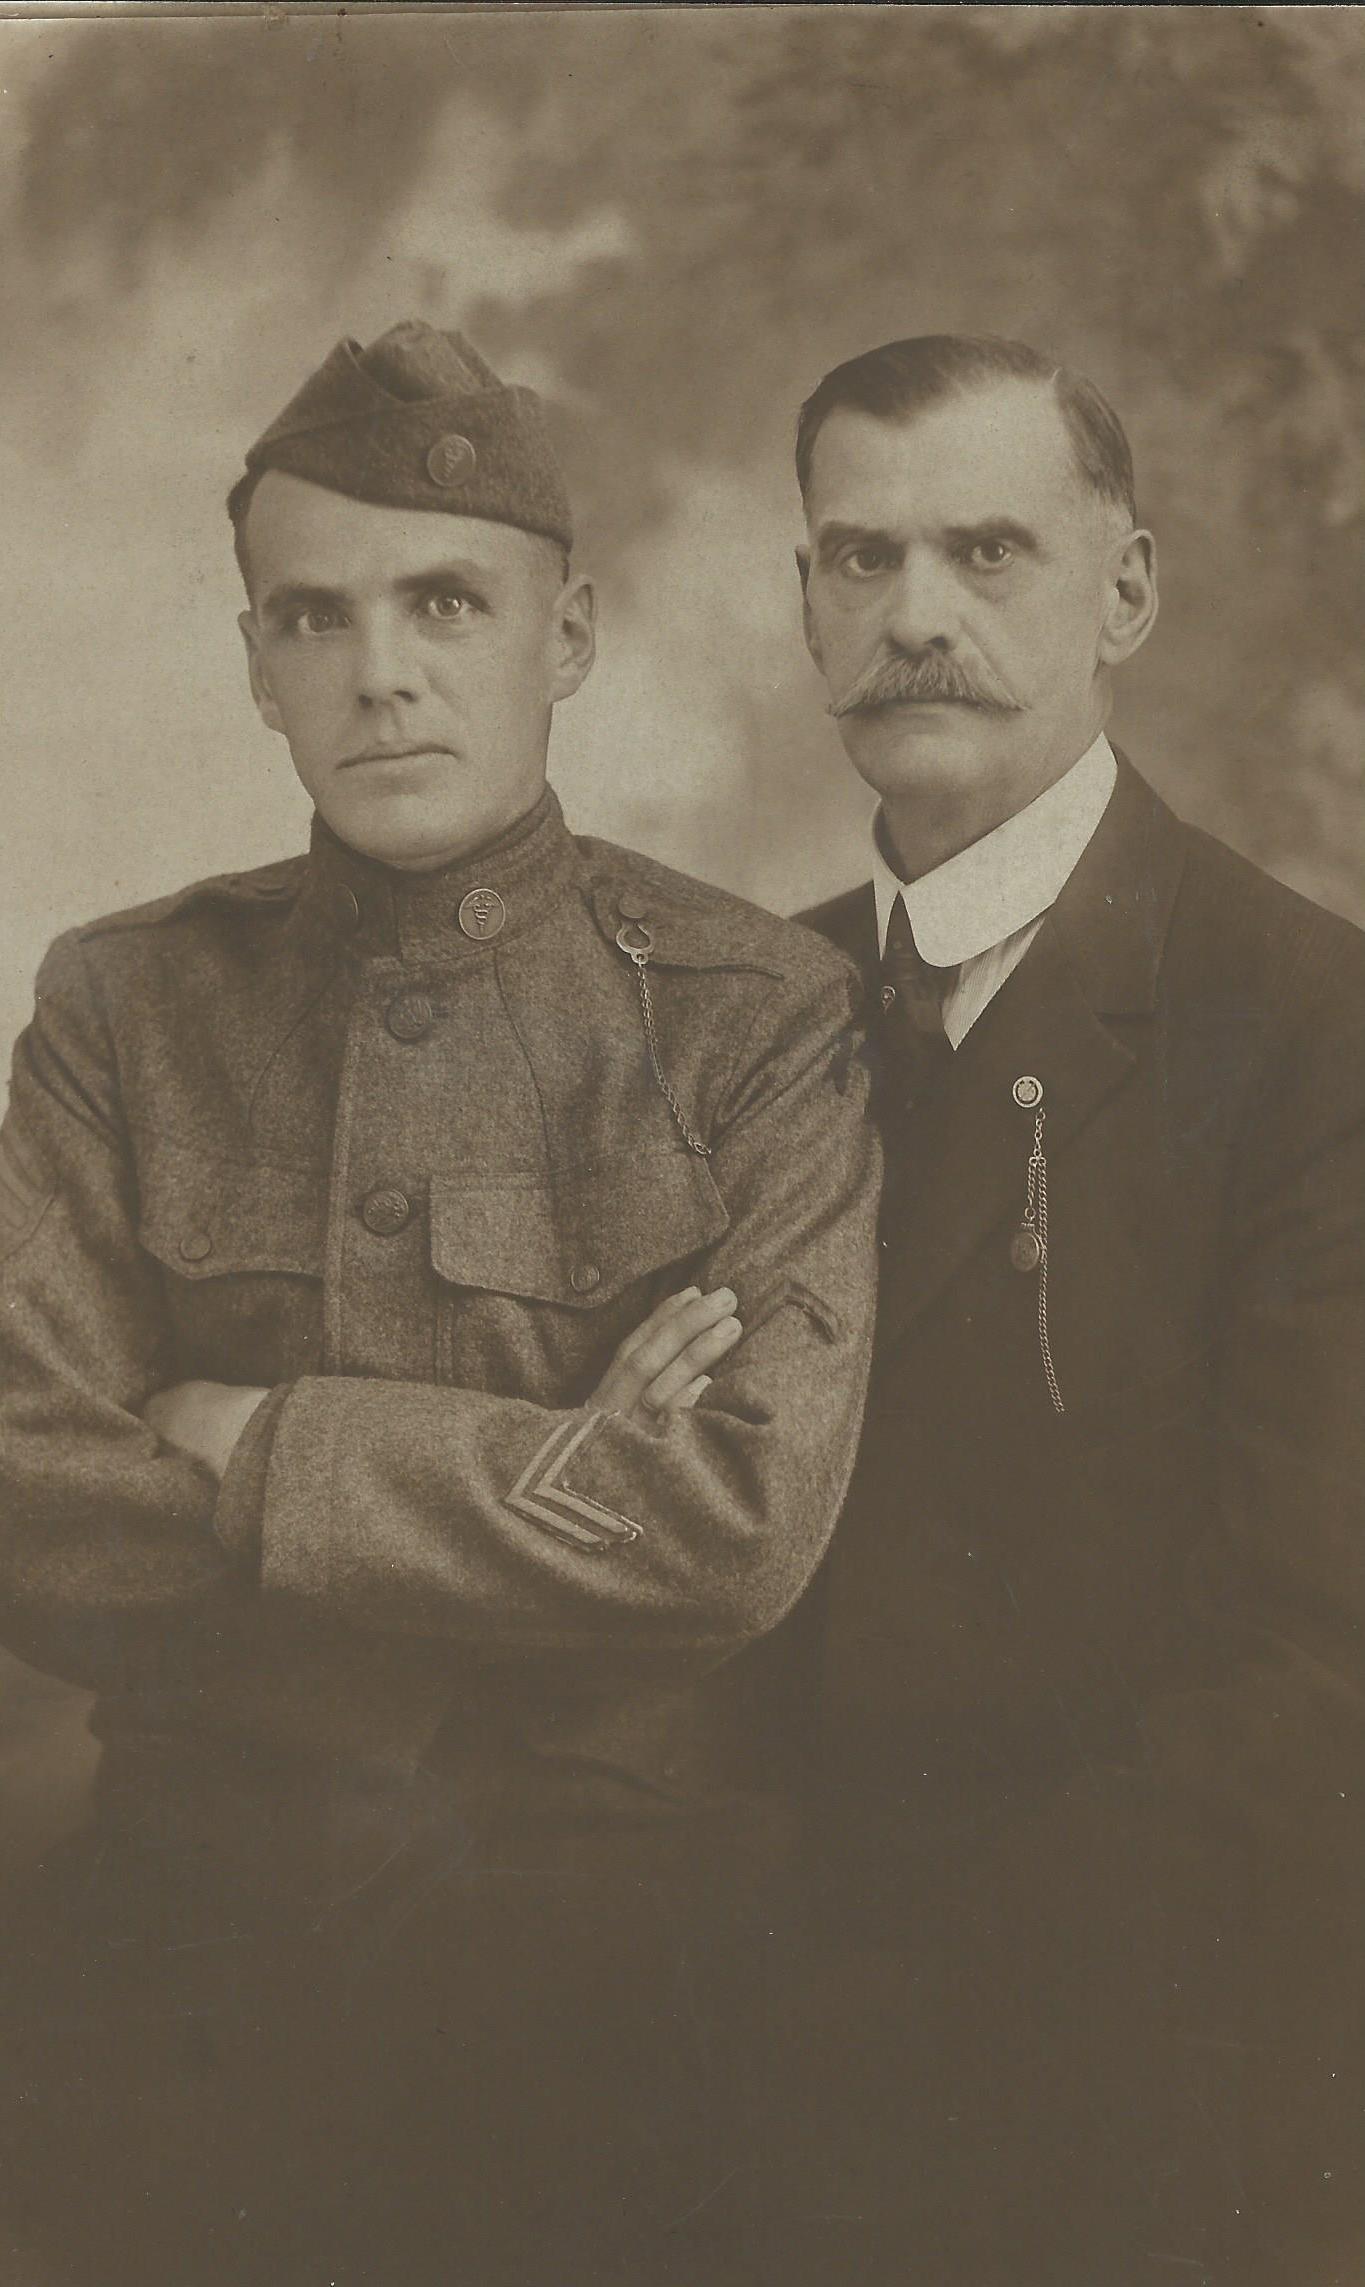 Elmer Merrill and his father Roando, probably before going overseas.